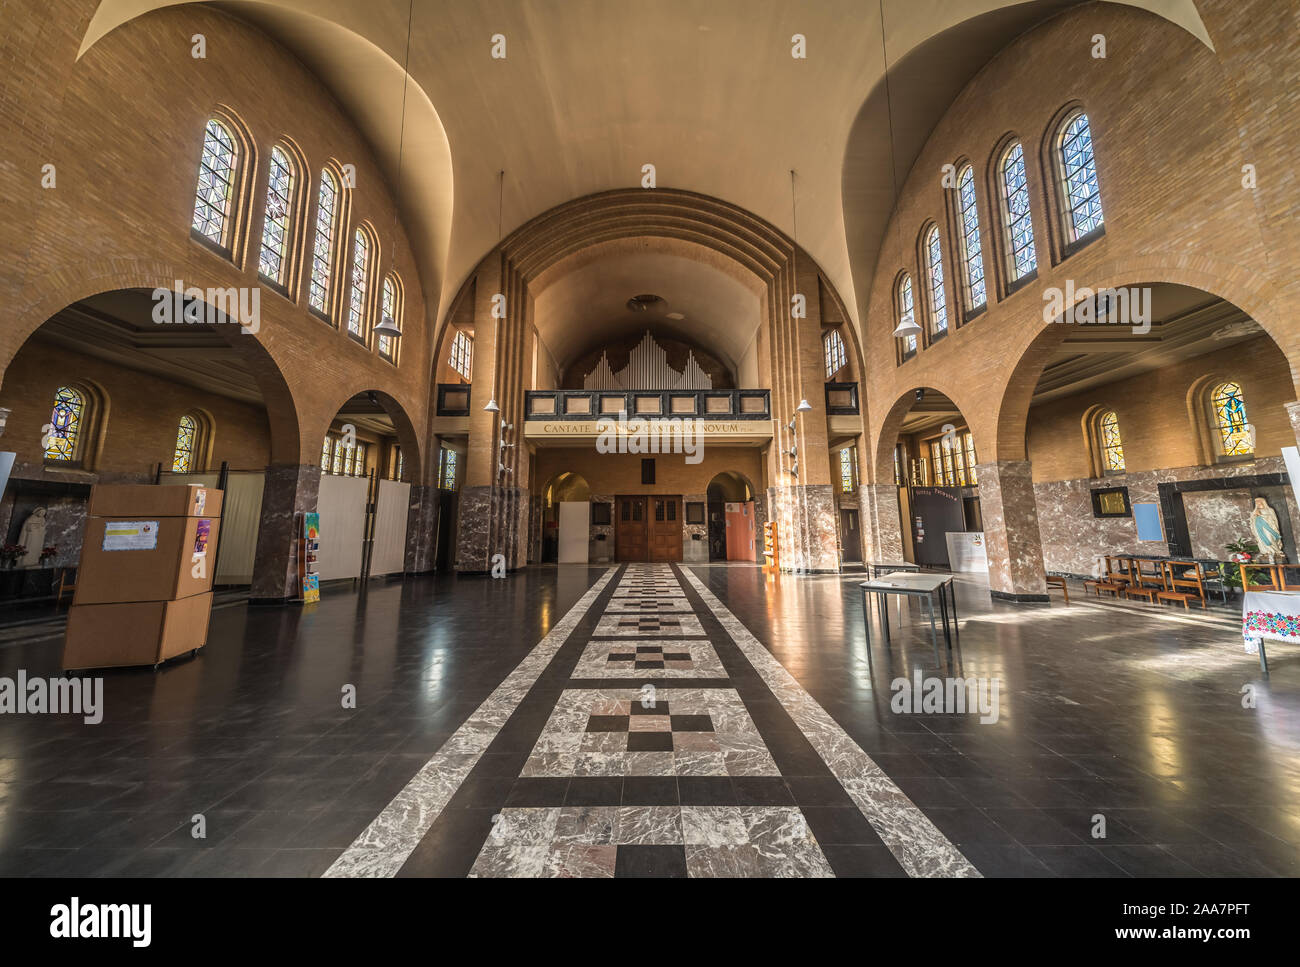 Jette, Brussels Capital Region / Belgium - 10 10 2019: Modern Gothic interior design of the Our Lady of Lourdes Roman Catholic church of Jette Stock Photo